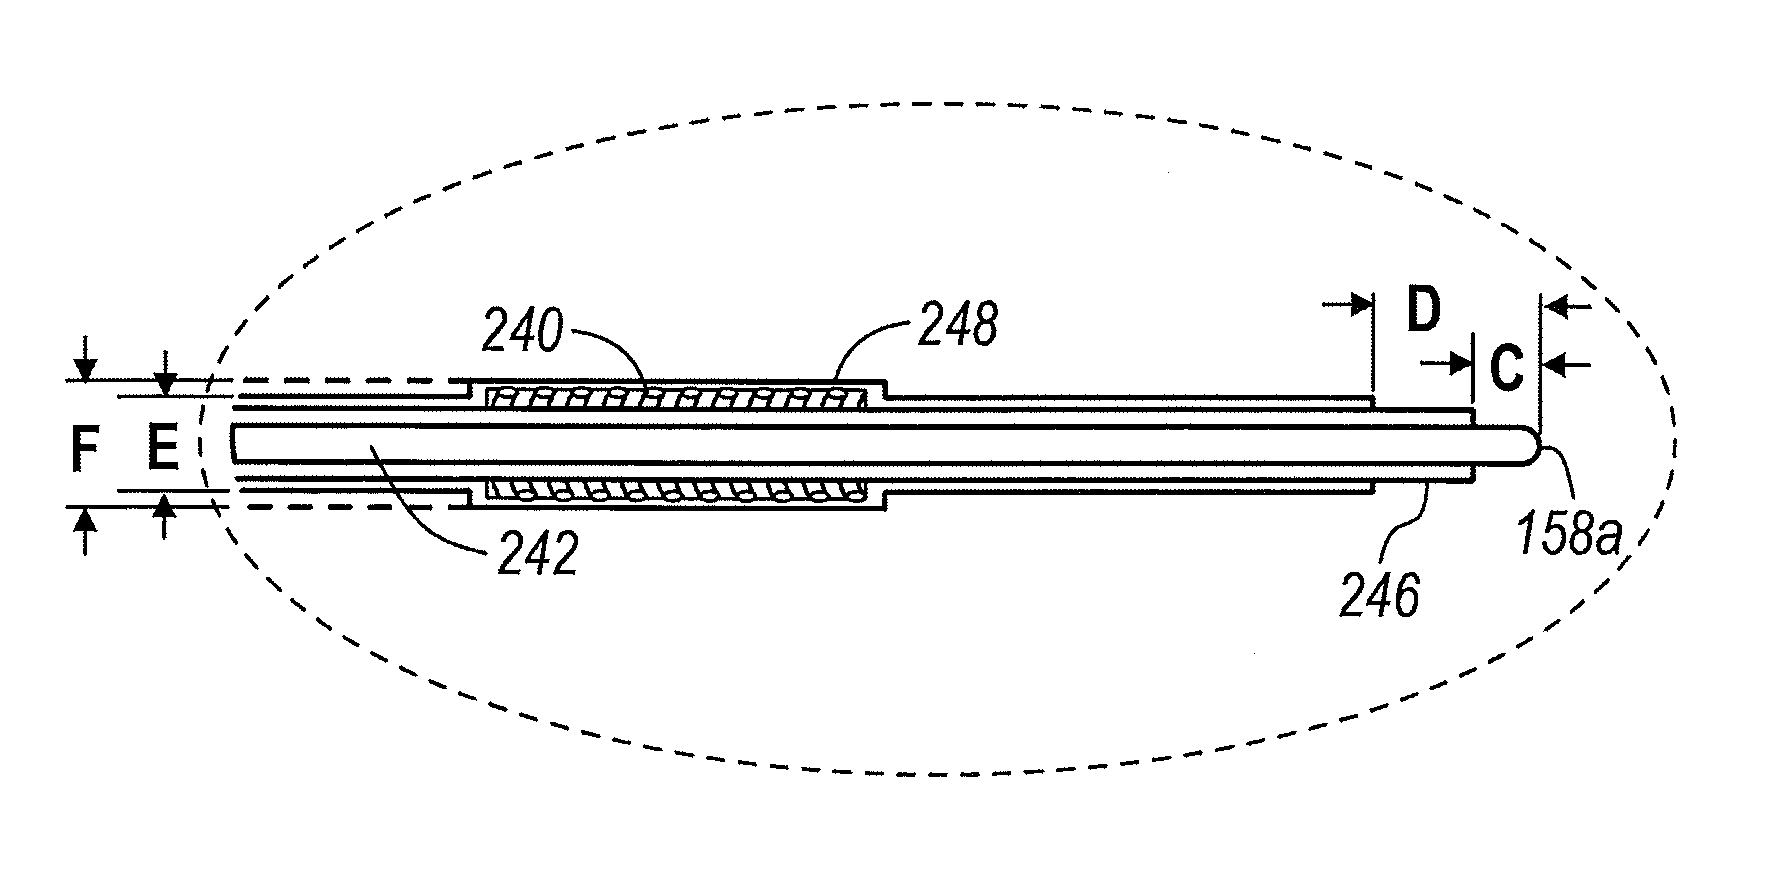 Method of forming an electromagnetic sensing coil in a medical instrument